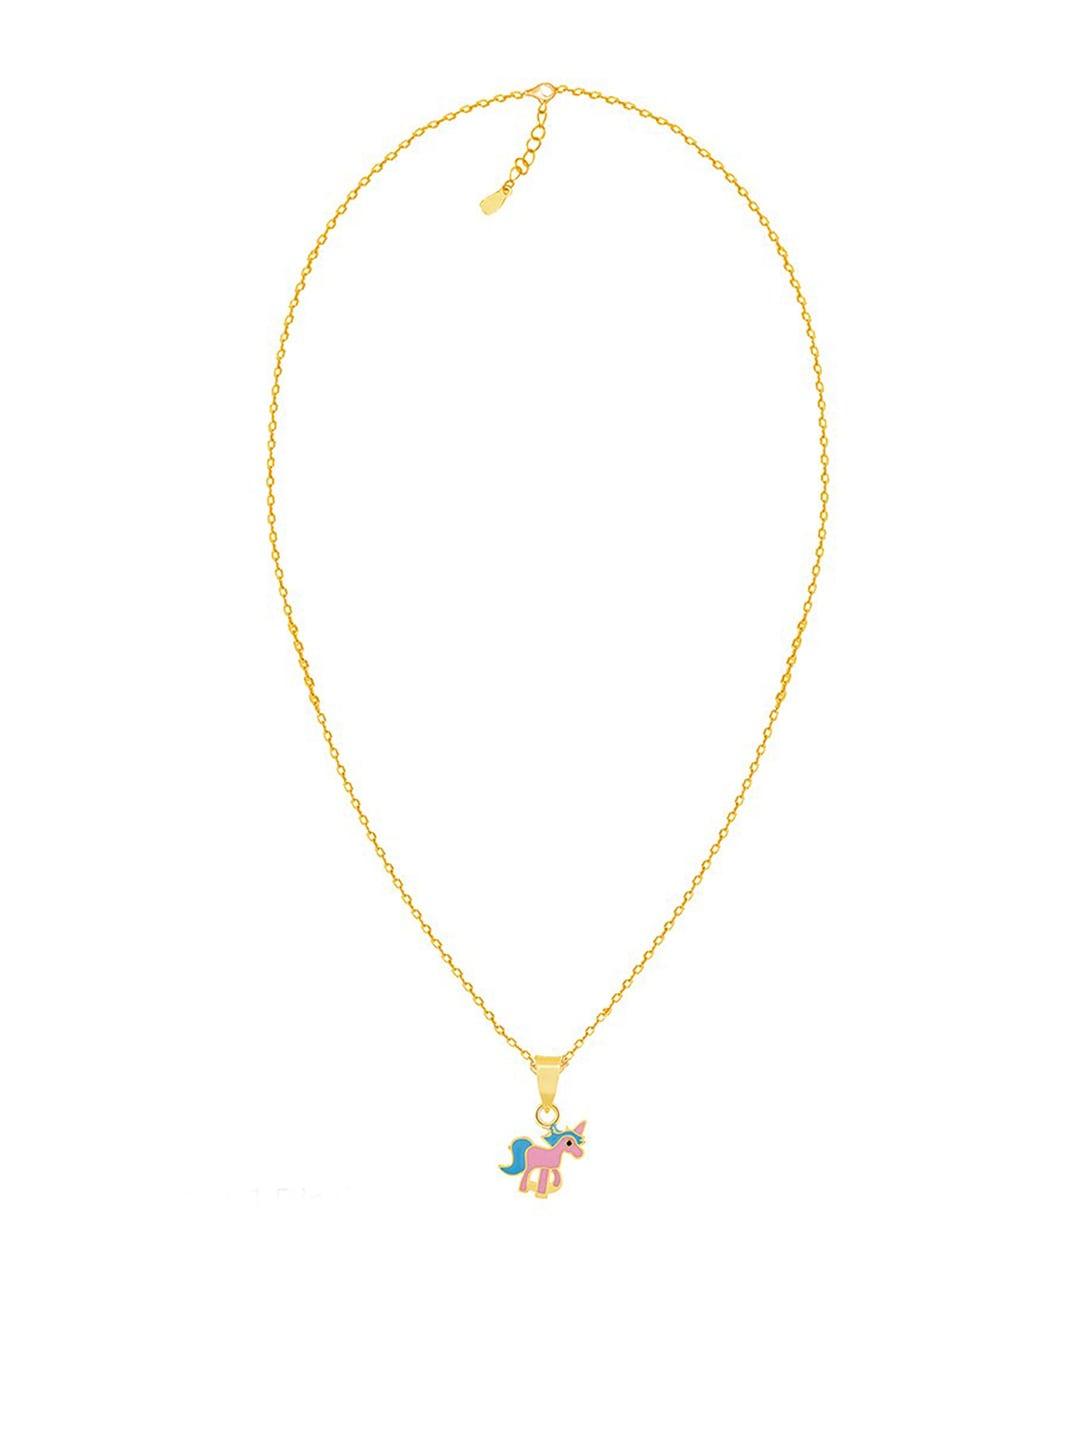 giva-girls-sterling-silver-gold-plated-blue-&-pink-unicorn-pendant-with-chain